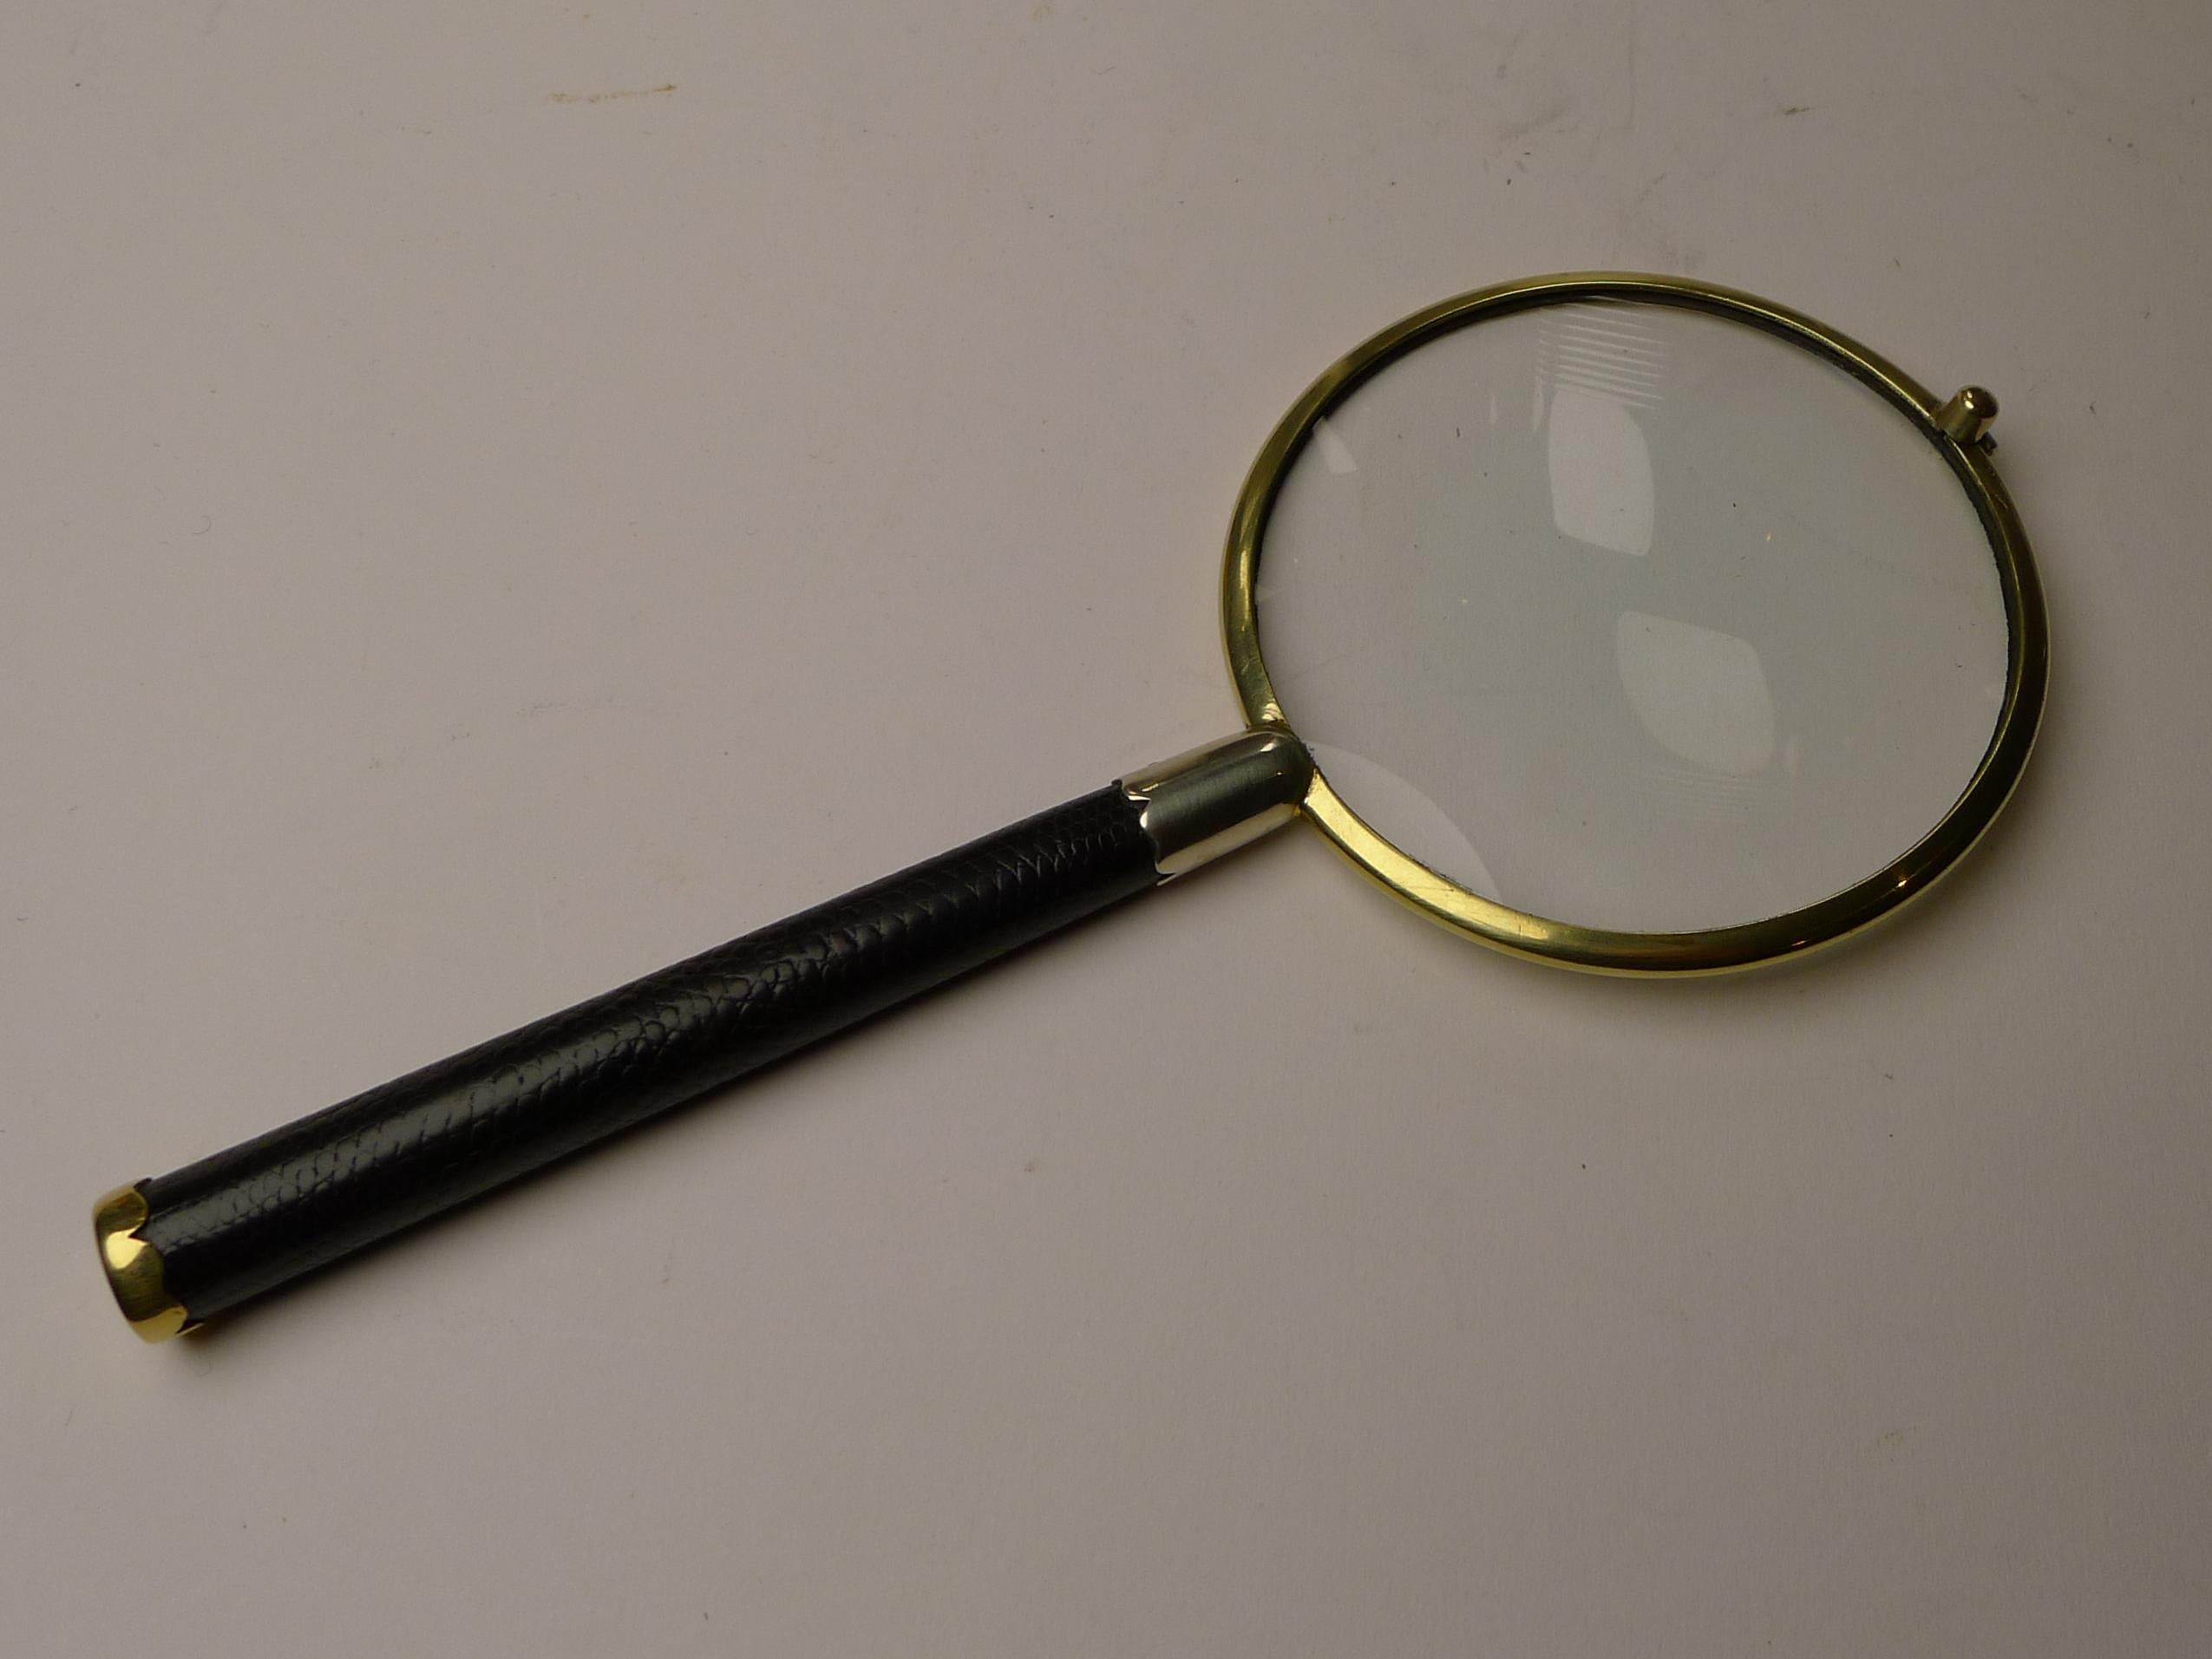 British Smart Antique Magnifying Glass by P H Vogel & Co. c.1920